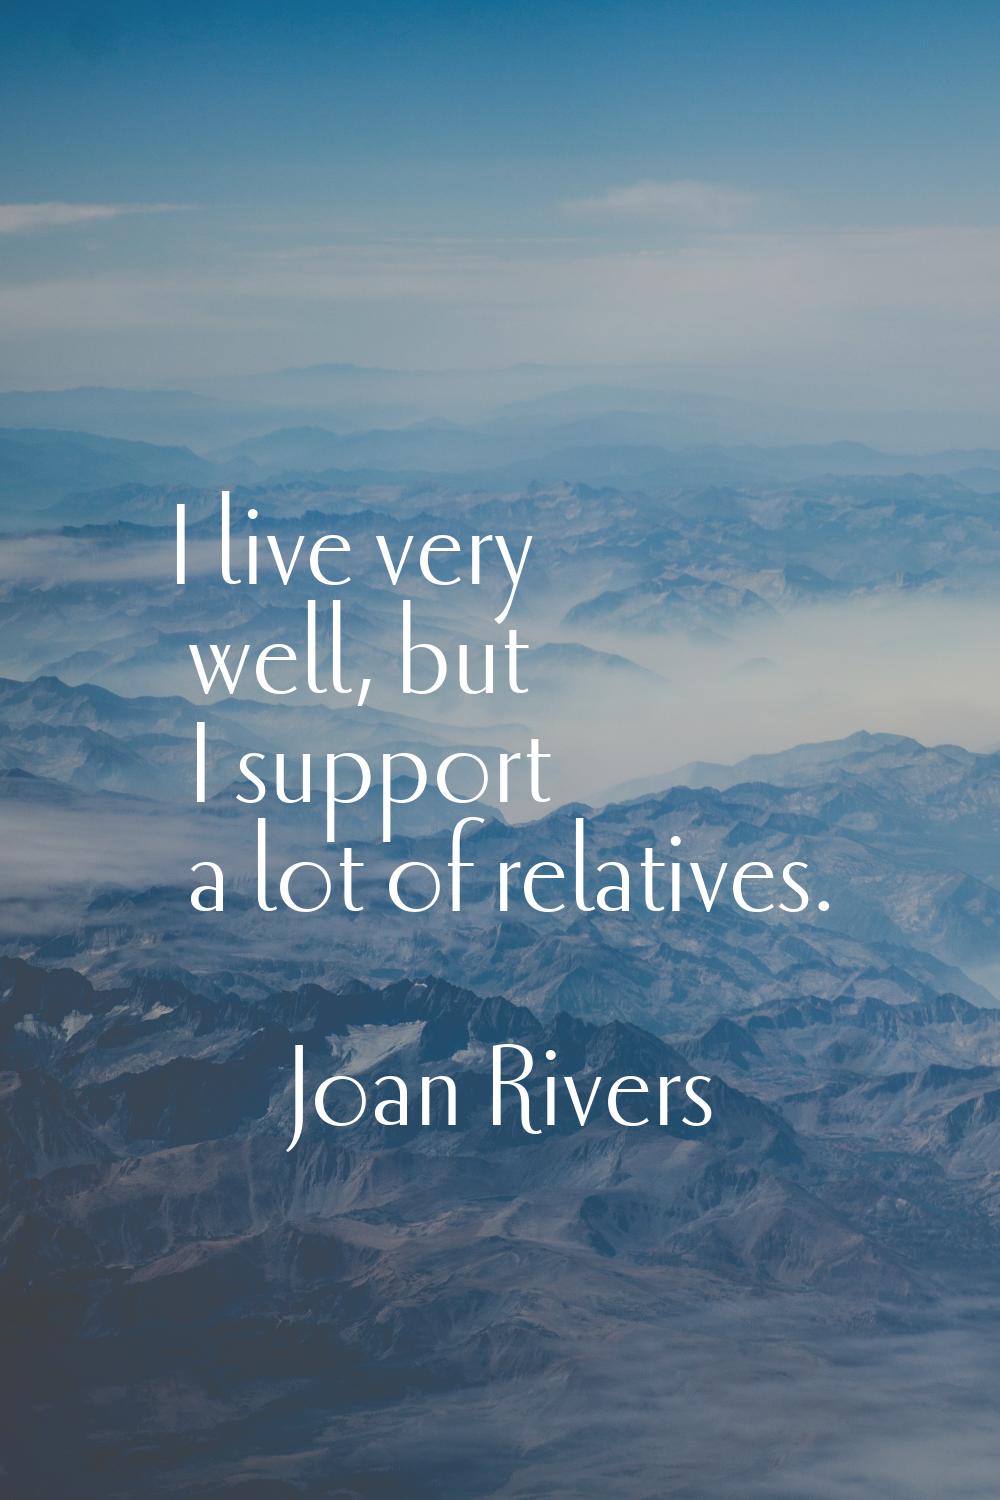 I live very well, but I support a lot of relatives.